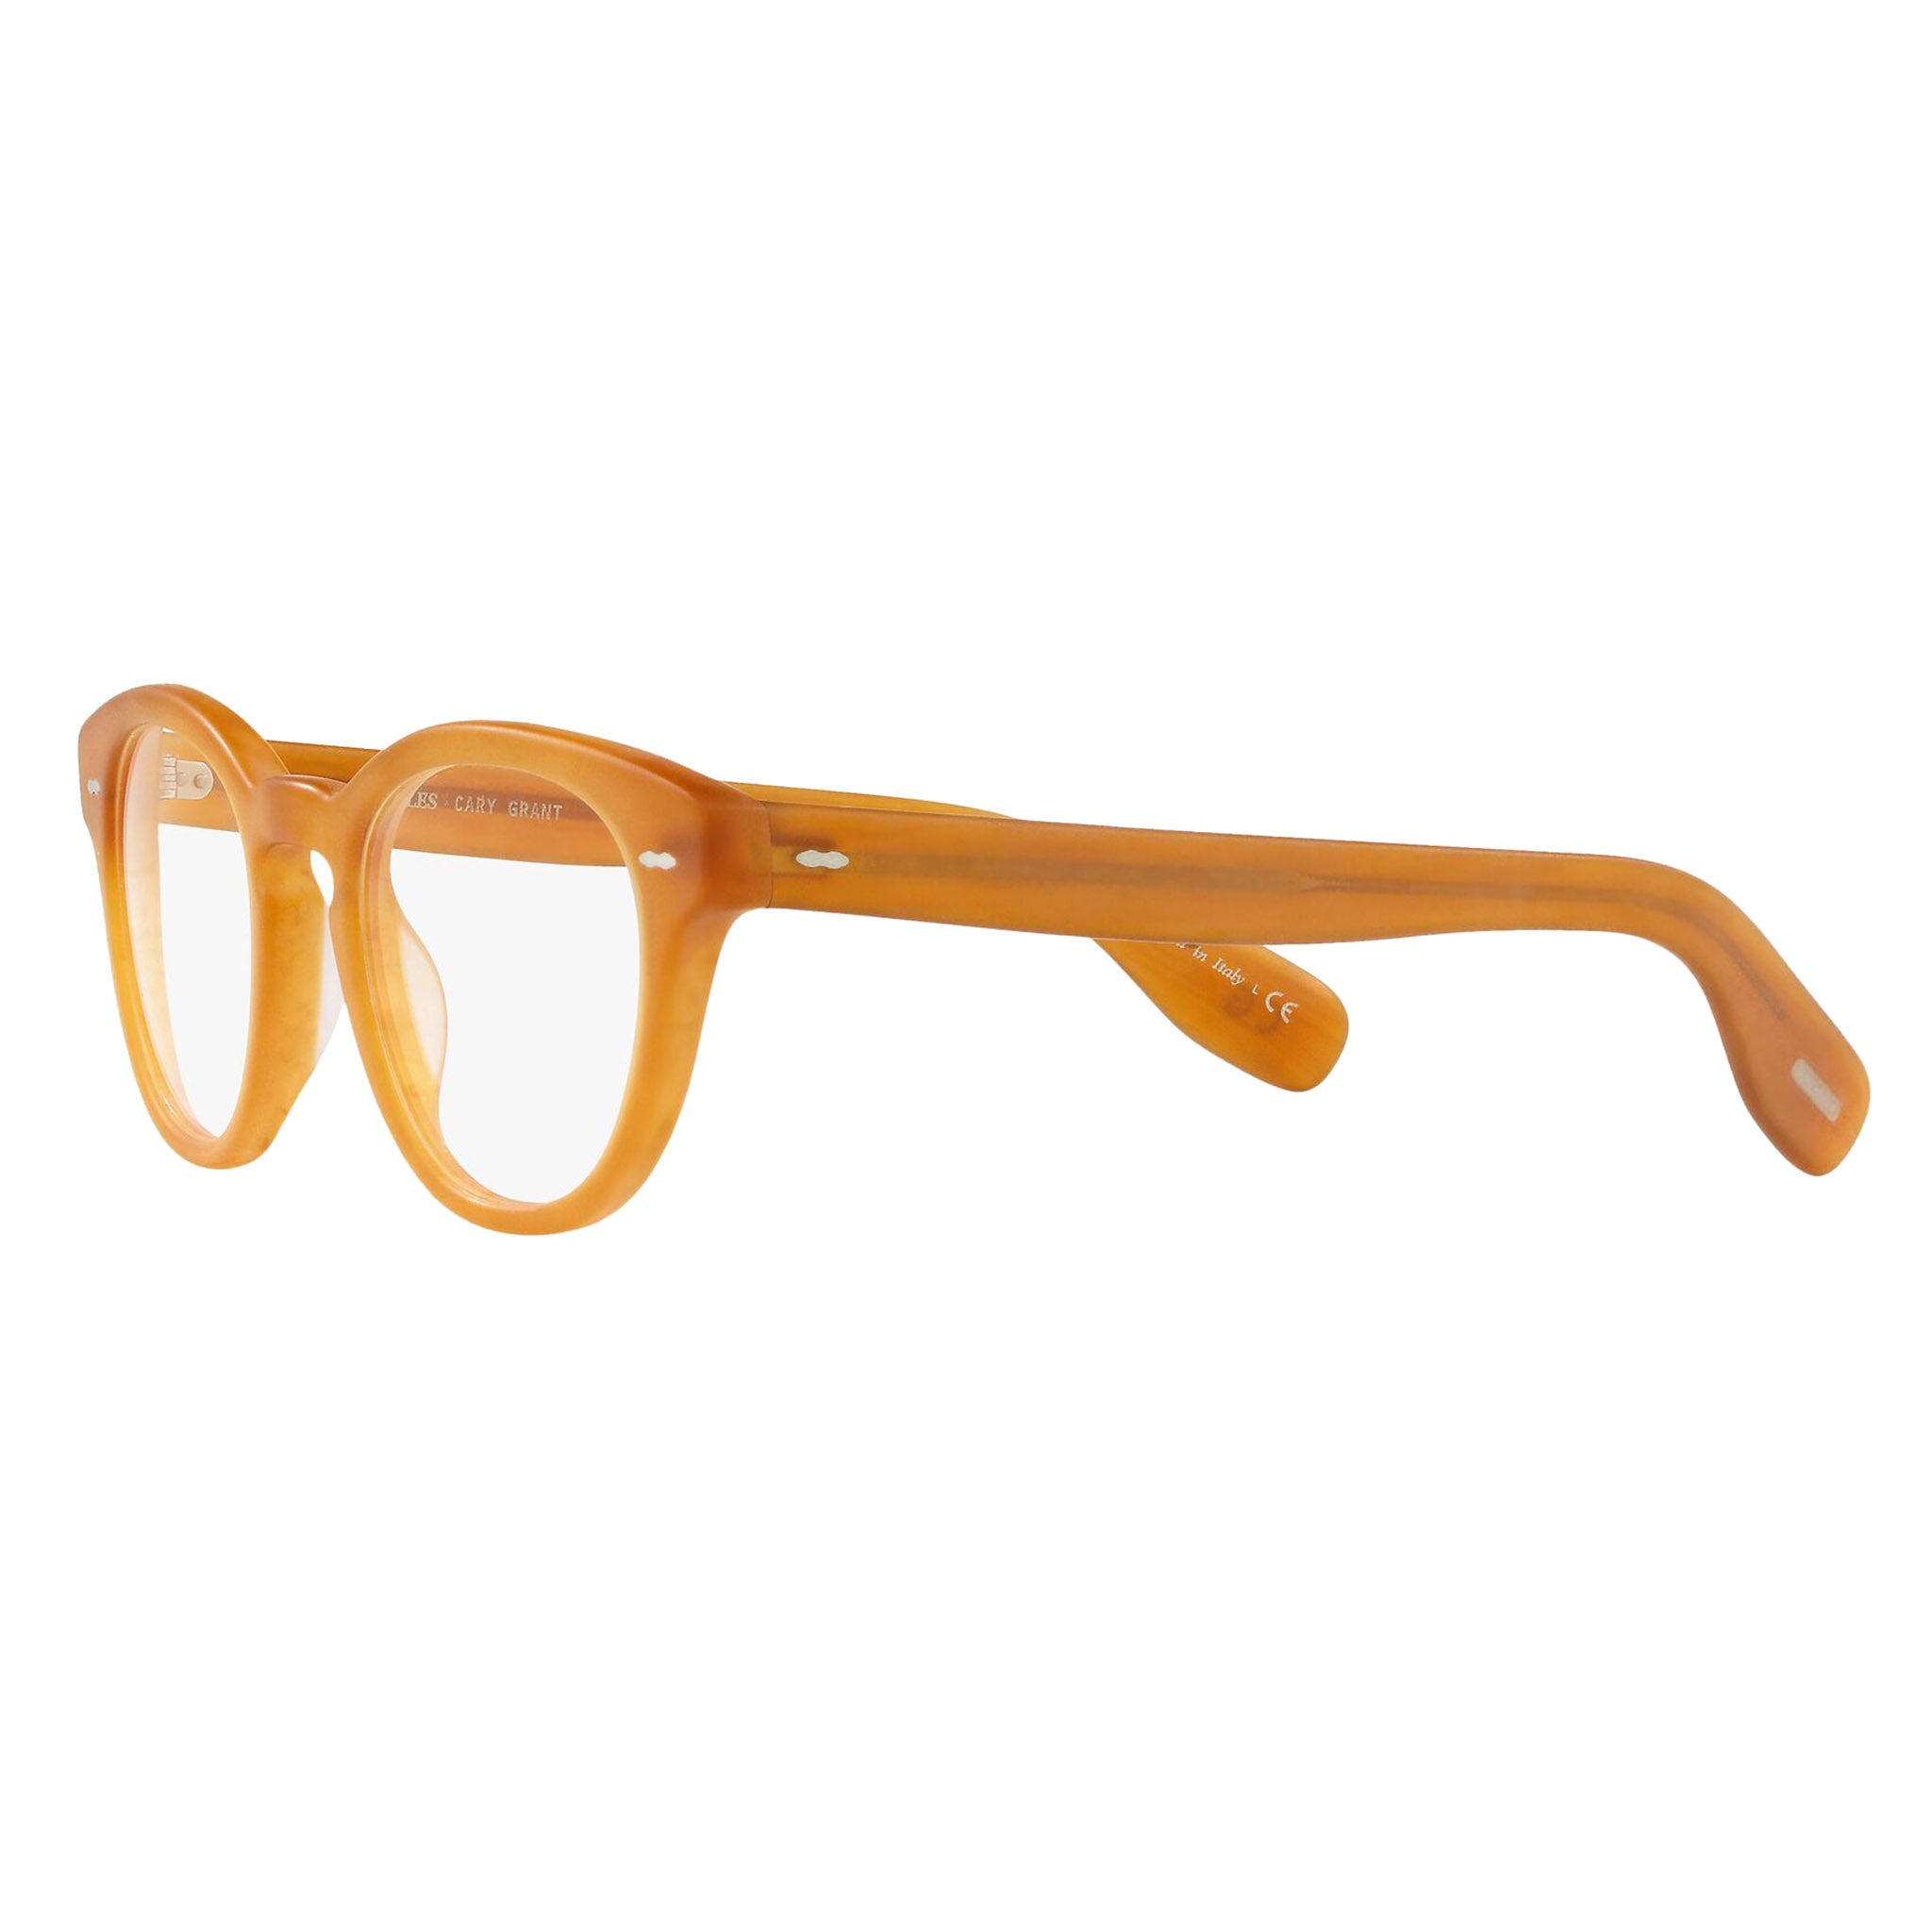 Oliver Peoples Cary Grant Semi Matte Amber Tortoise